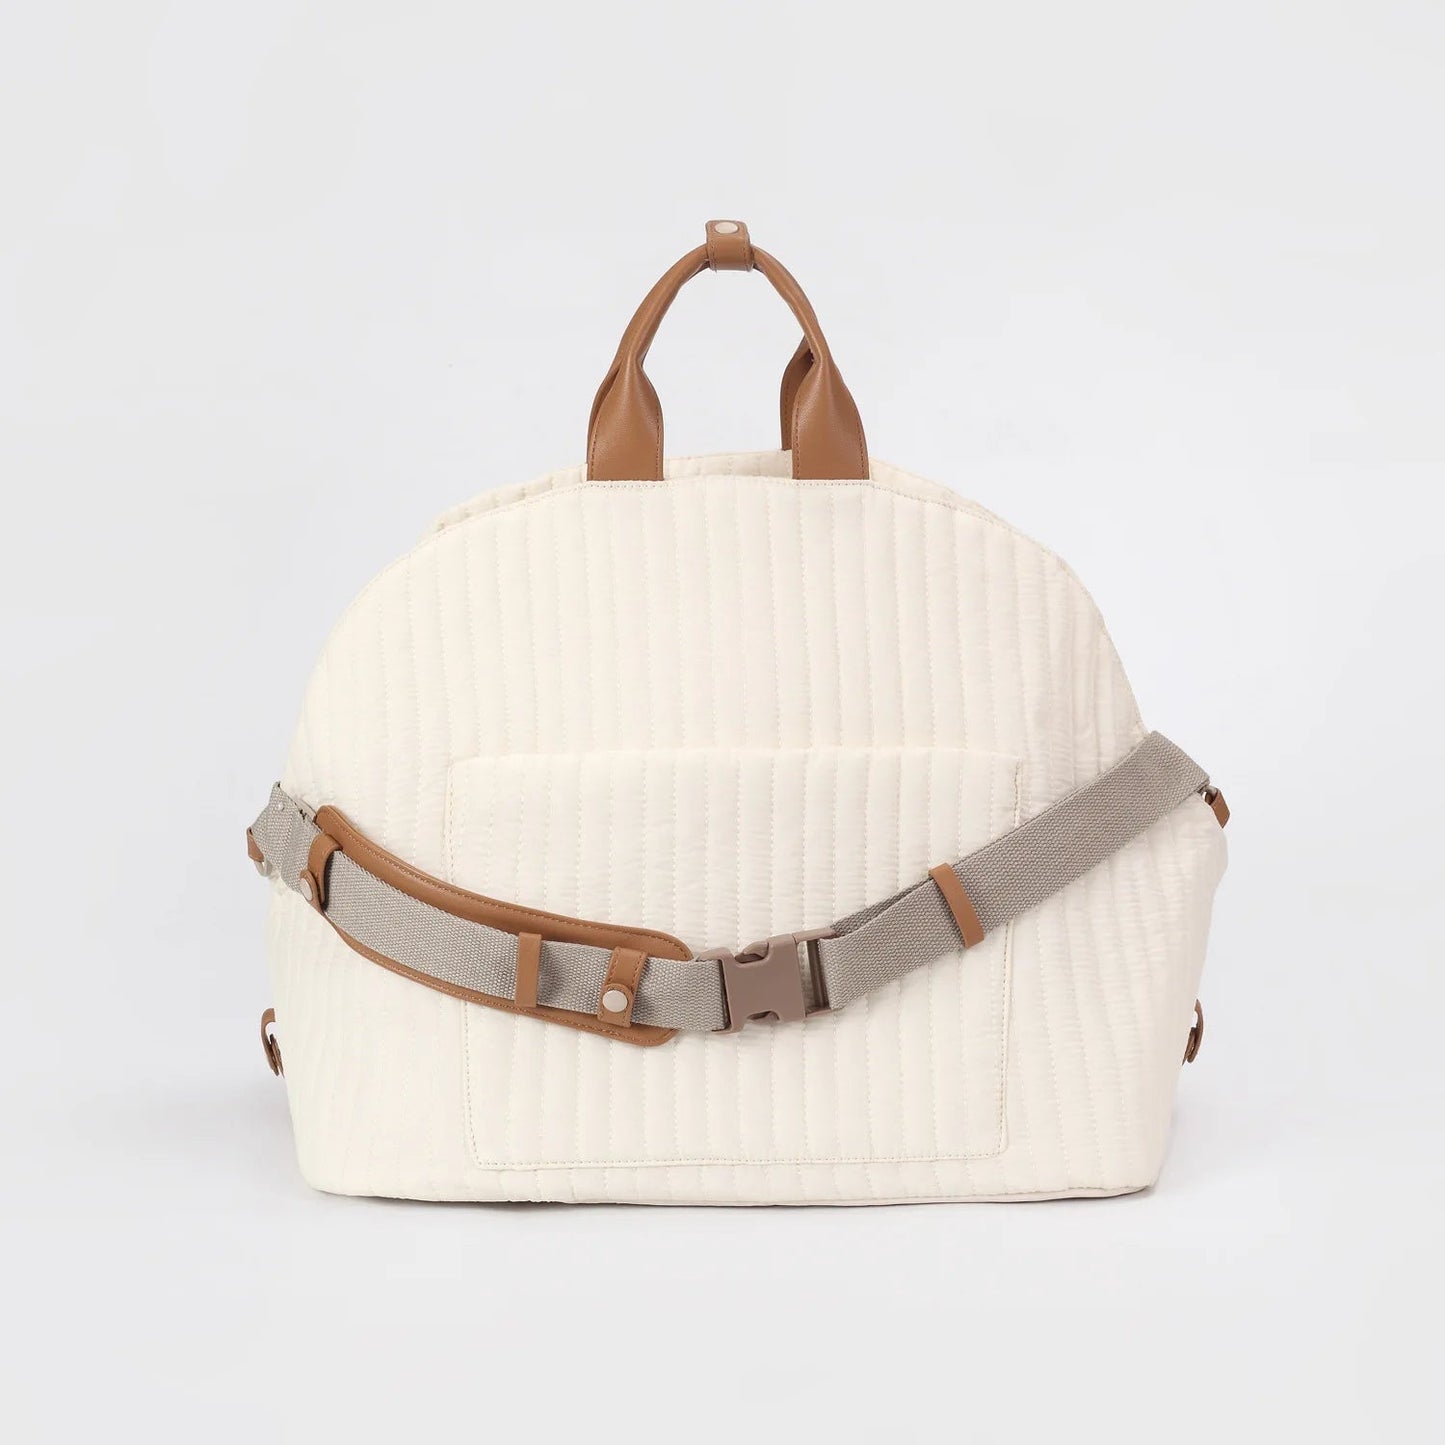 Luxury cat carrier bag in soft beige color with vertical stripe quilting that looks elegant